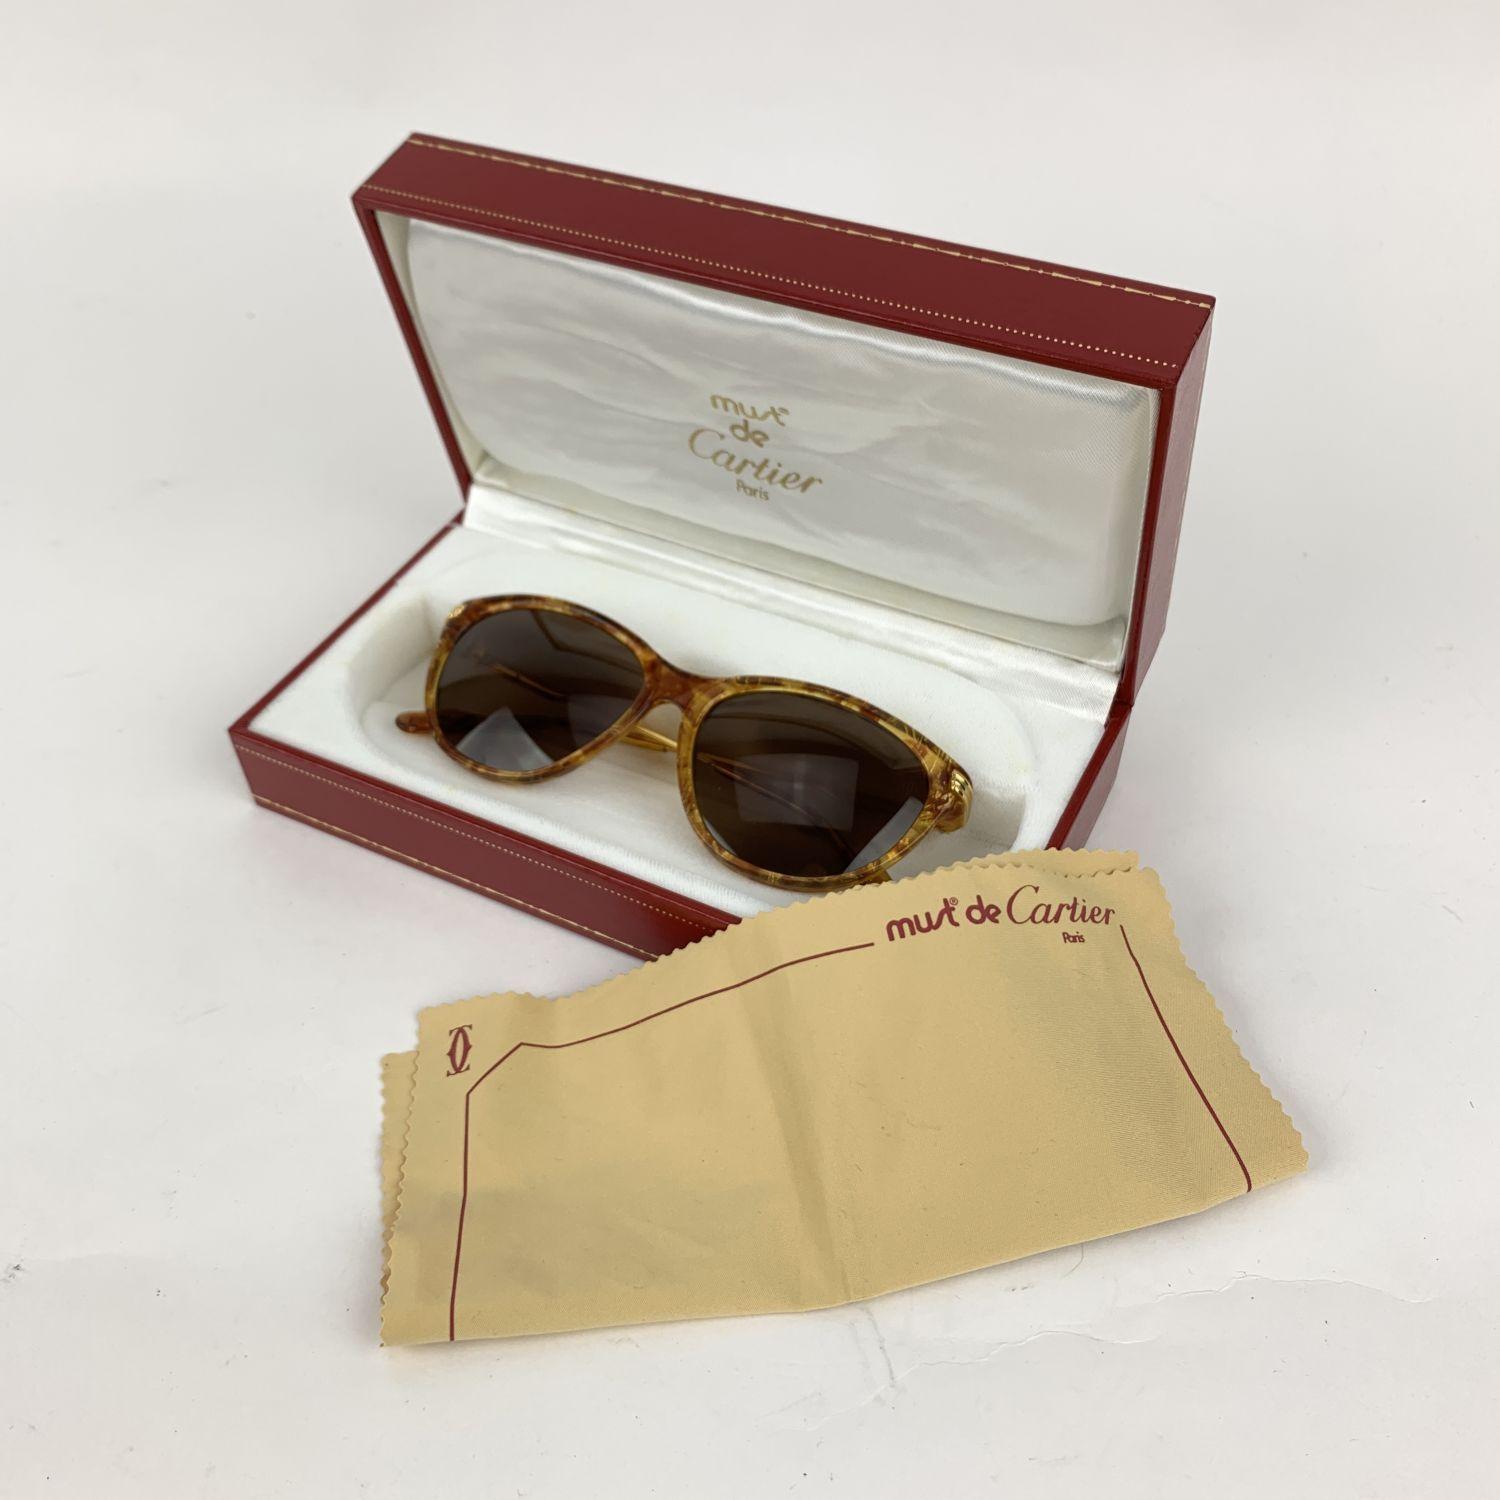 Tortoise acetate eclat miel dore Cartier sunglasses from the 90s. Lightweight Full-Rim Frame. 22kt Gold Plated Frame Original Cartier Brown Lens, Original Box and suede cleaning cloth.

Details

MATERIAL: Gold Plated

COLOR: Brown

MODEL: Eclat Miel